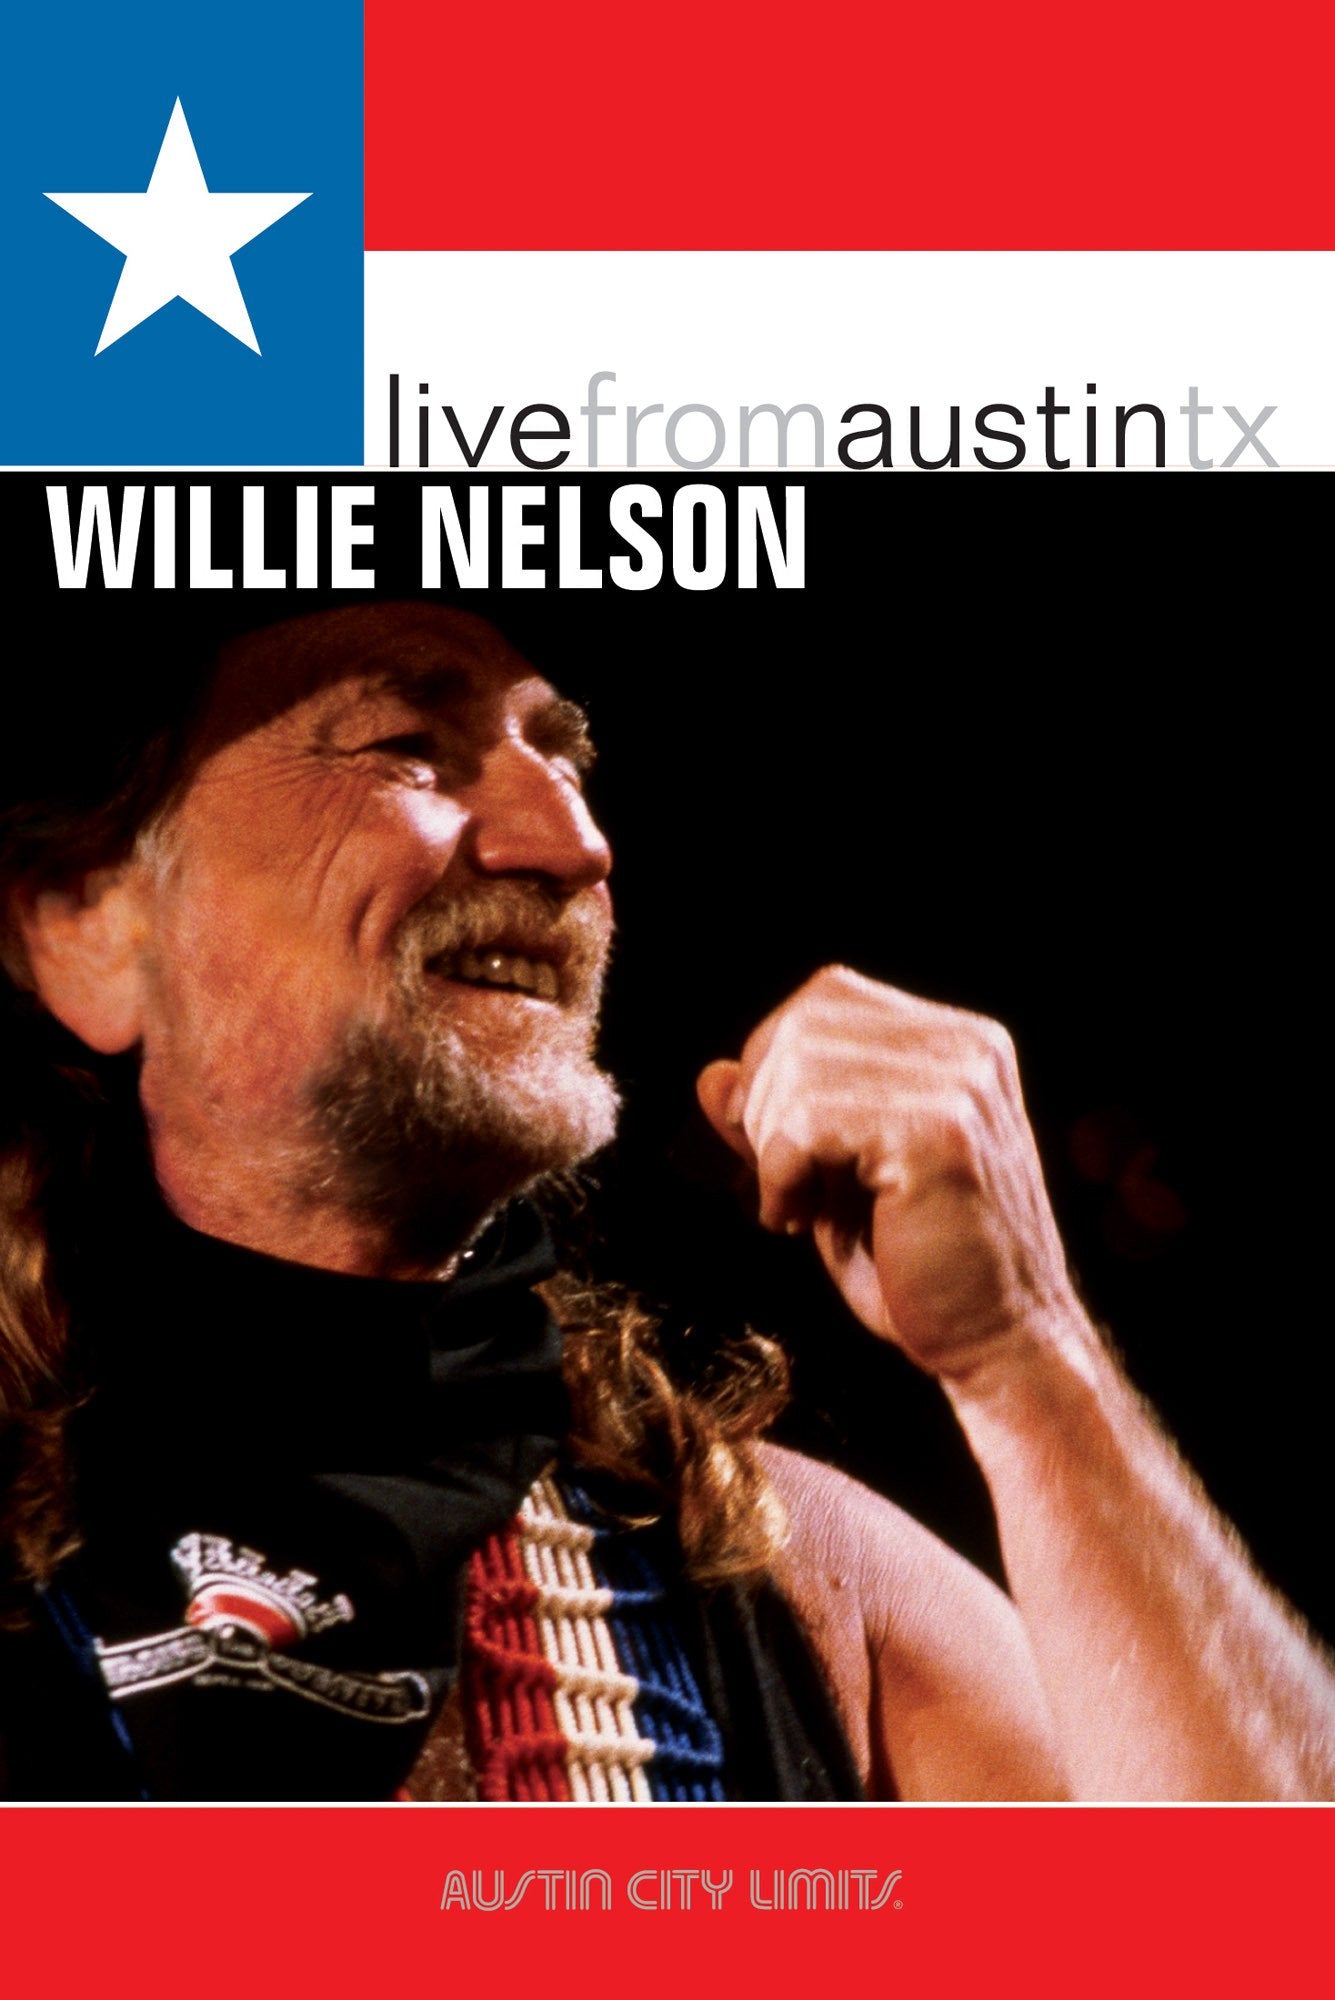 Willie Nelson - Live From Austin, TX [DVD]